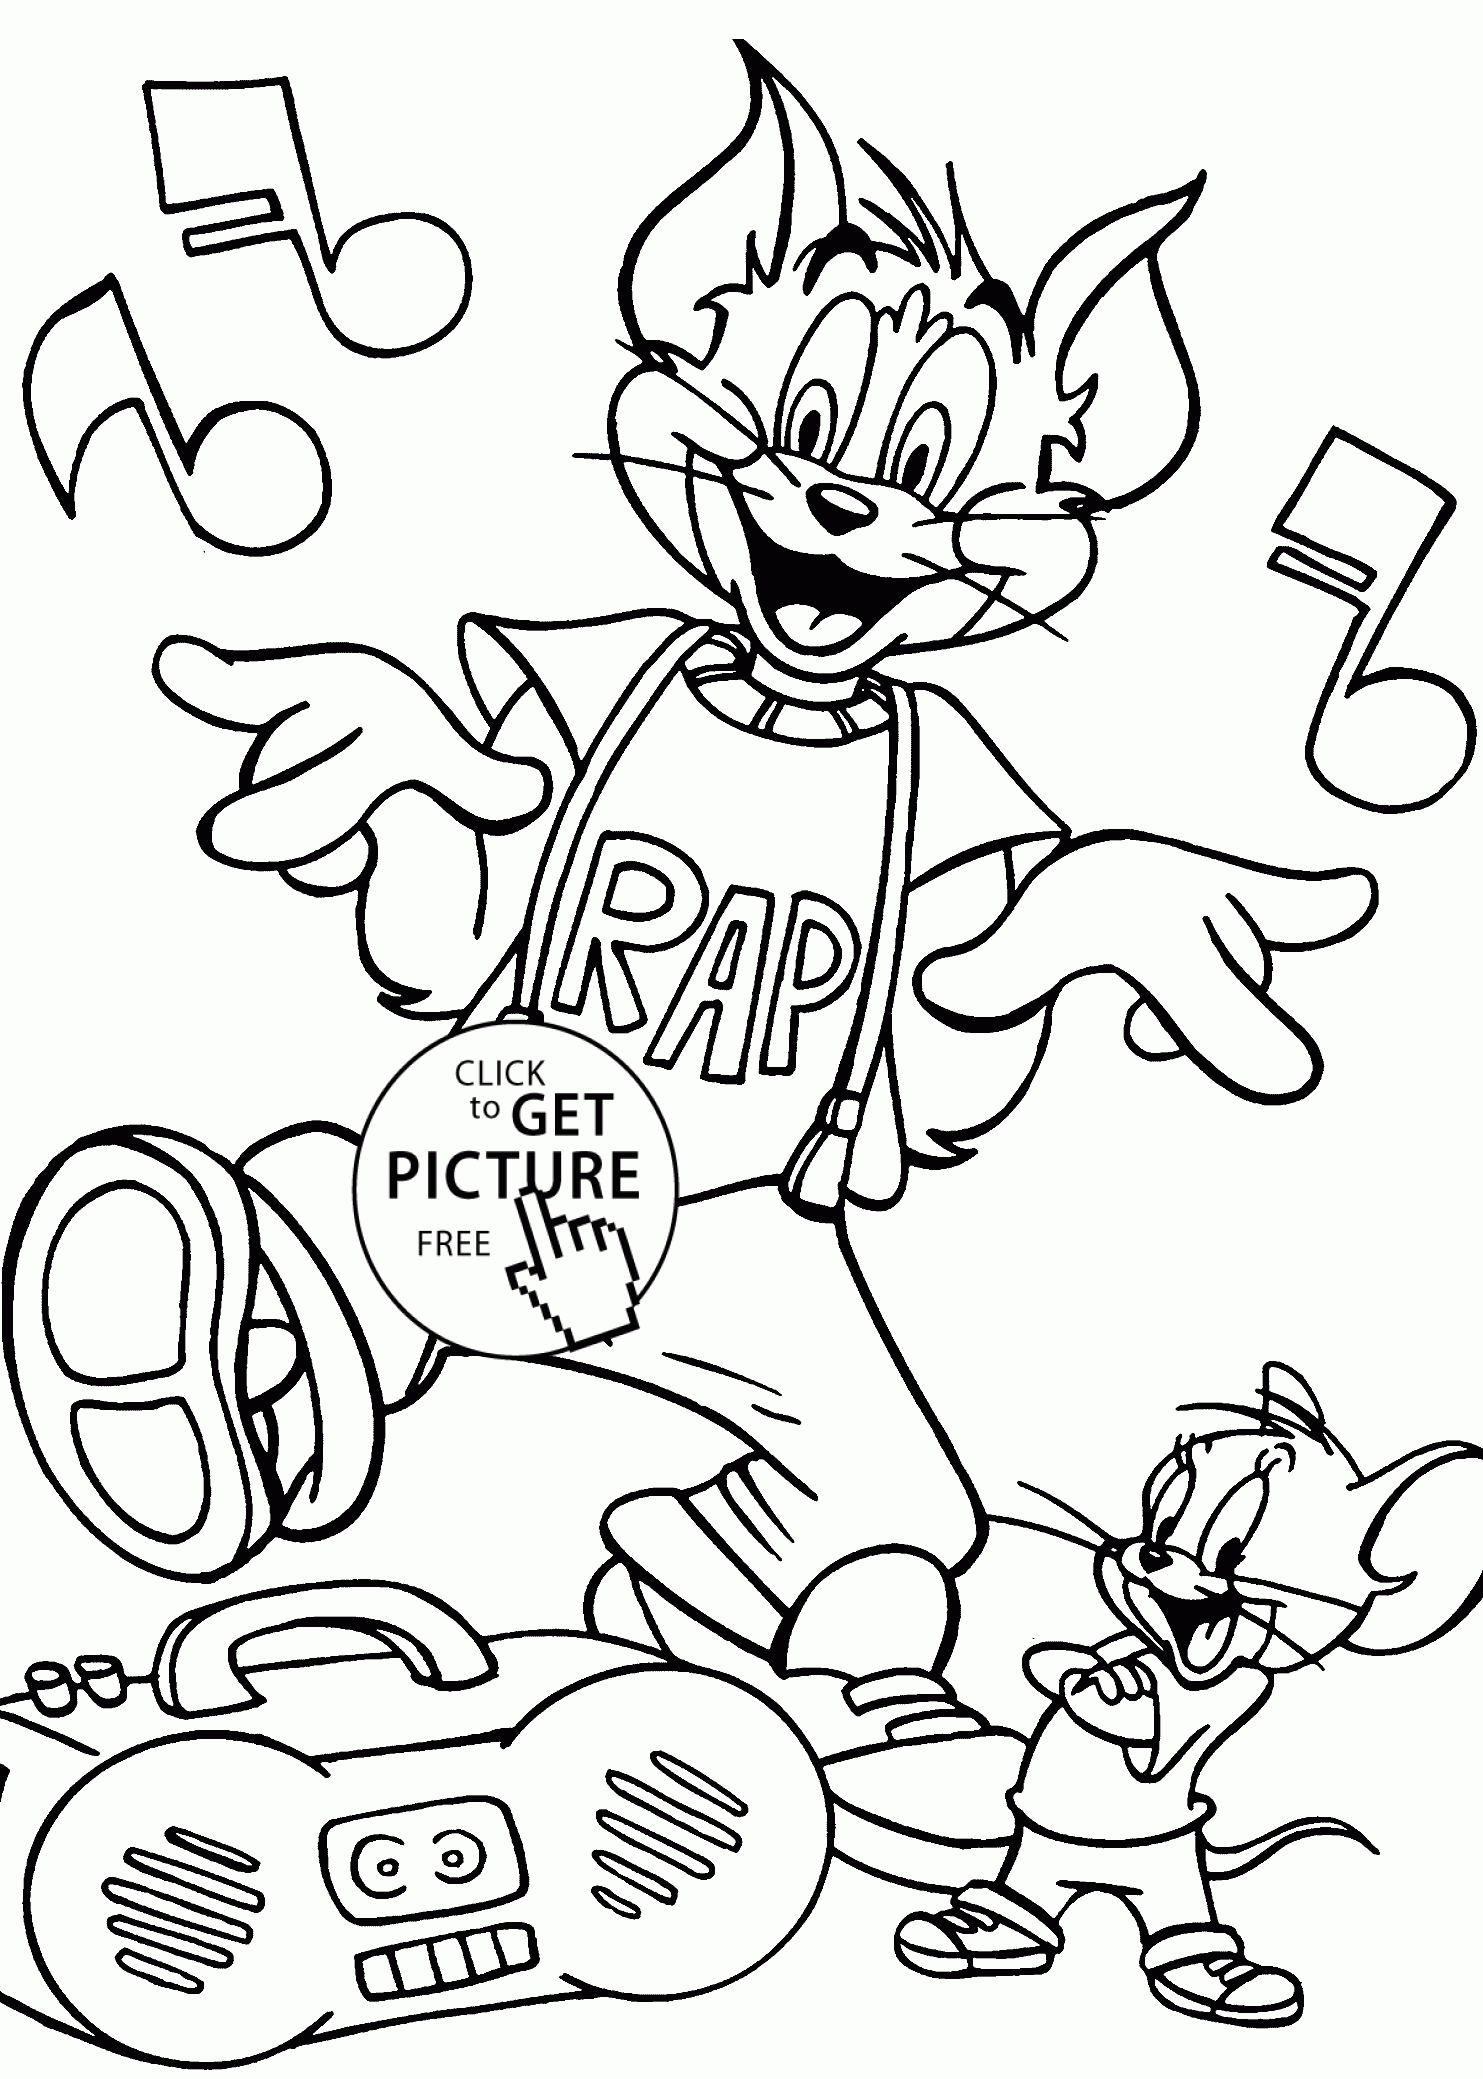 Tom And Jerry Dance Coloring Pages For Kids, Printable Free - Free Printable Tom And Jerry Coloring Pages